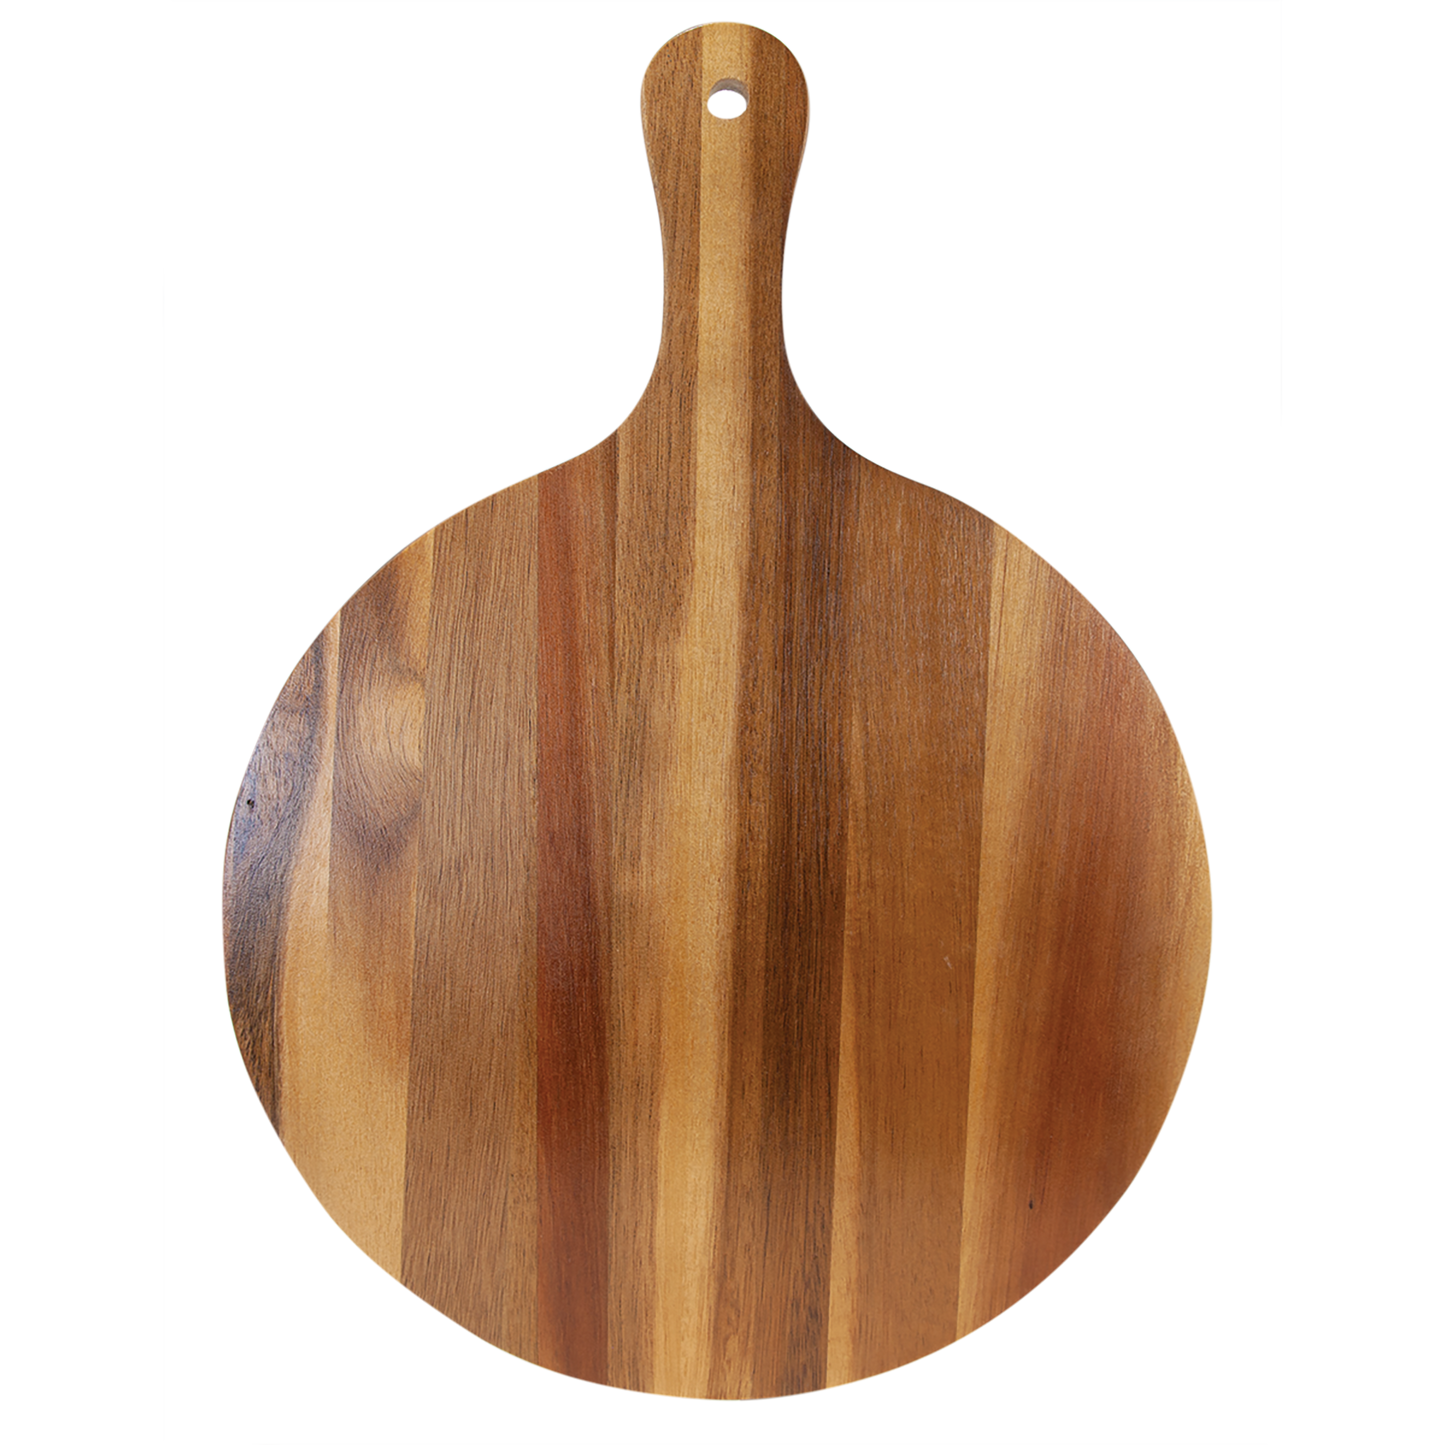 14 1/2" x 10 1/2" Round Acacia Wood/Slate Serving Board with Handle - Birthday Gift